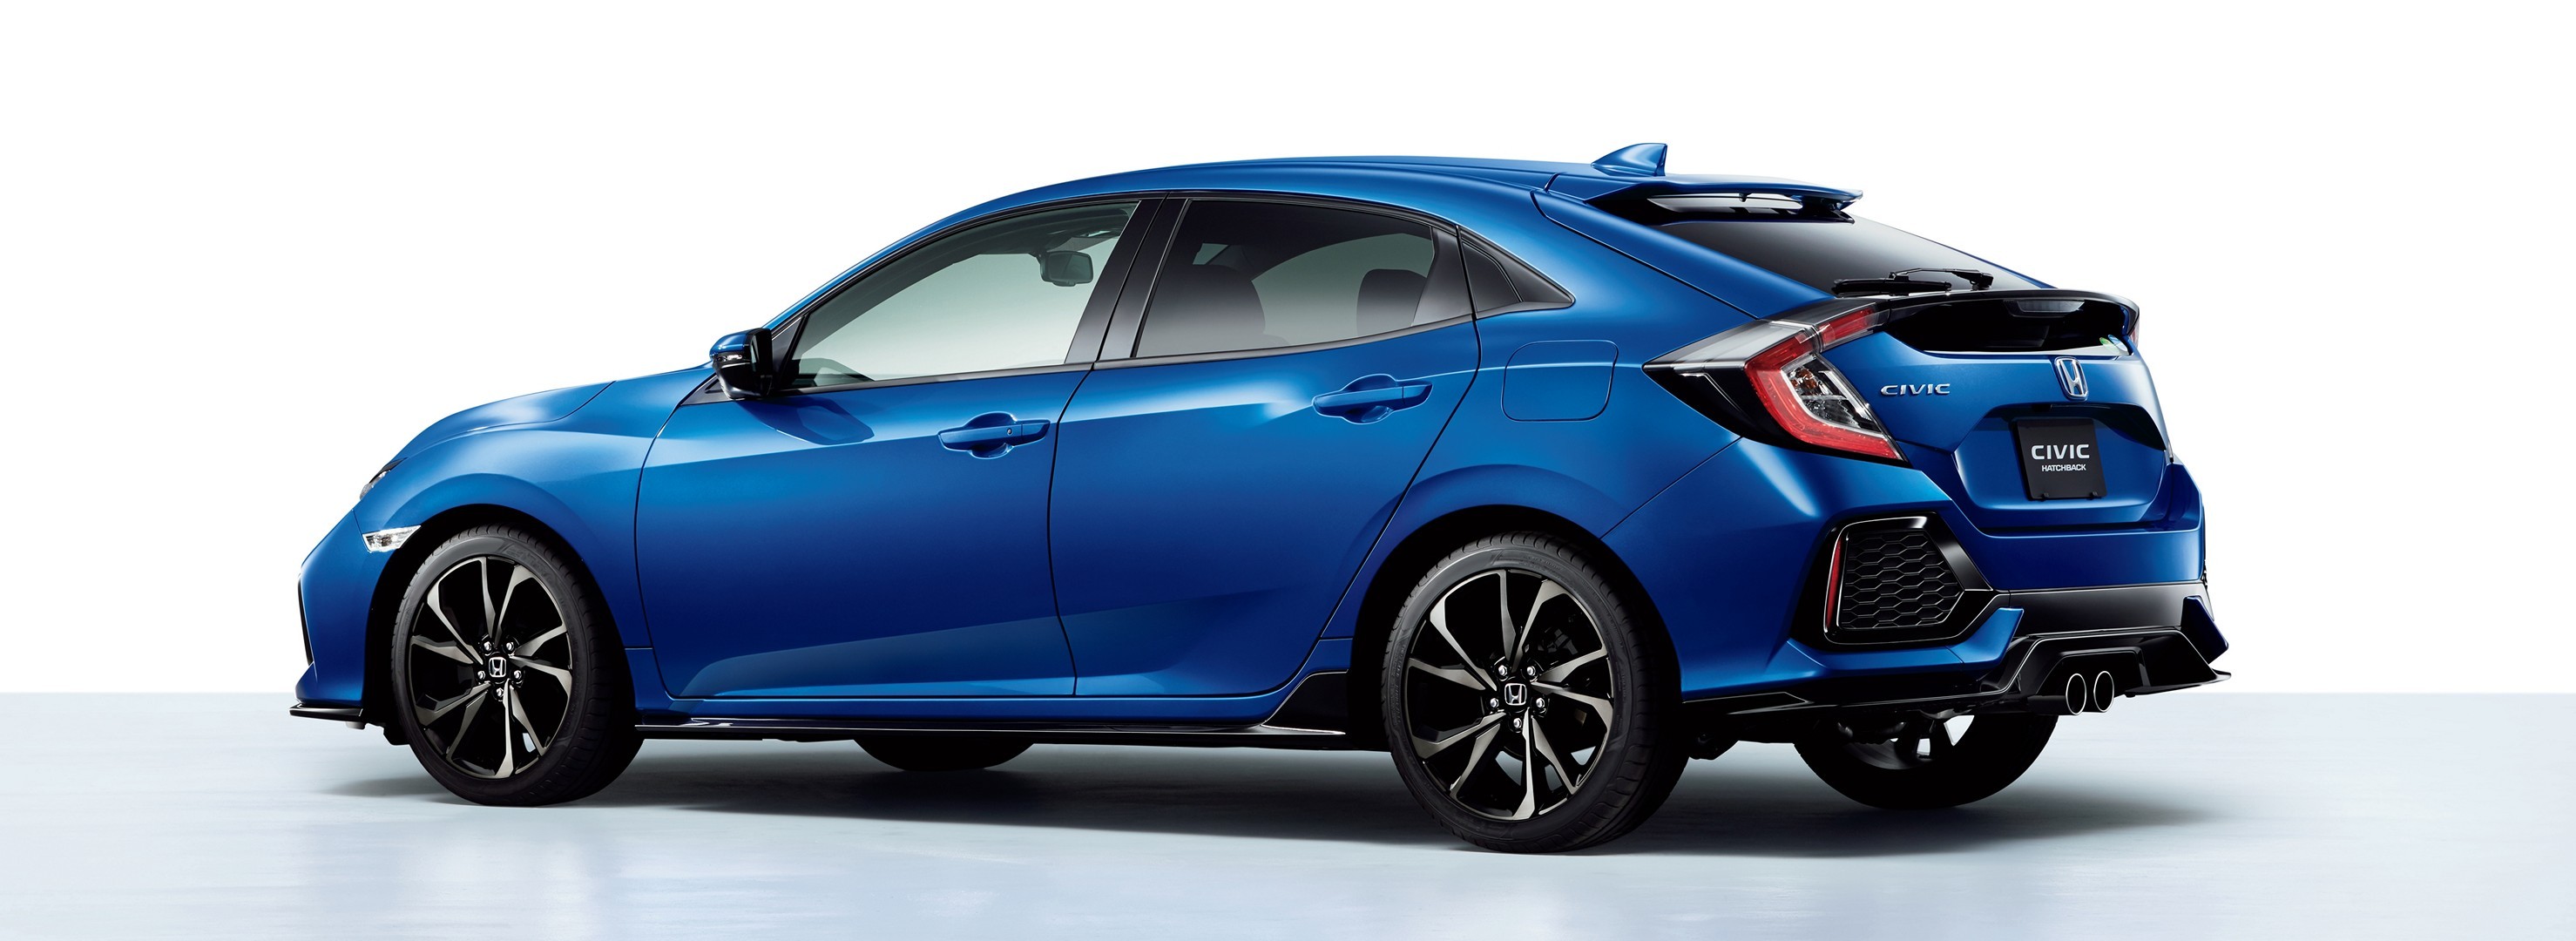 17 Honda Civic Hatch And Sedan Launched In Japan Autoevolution